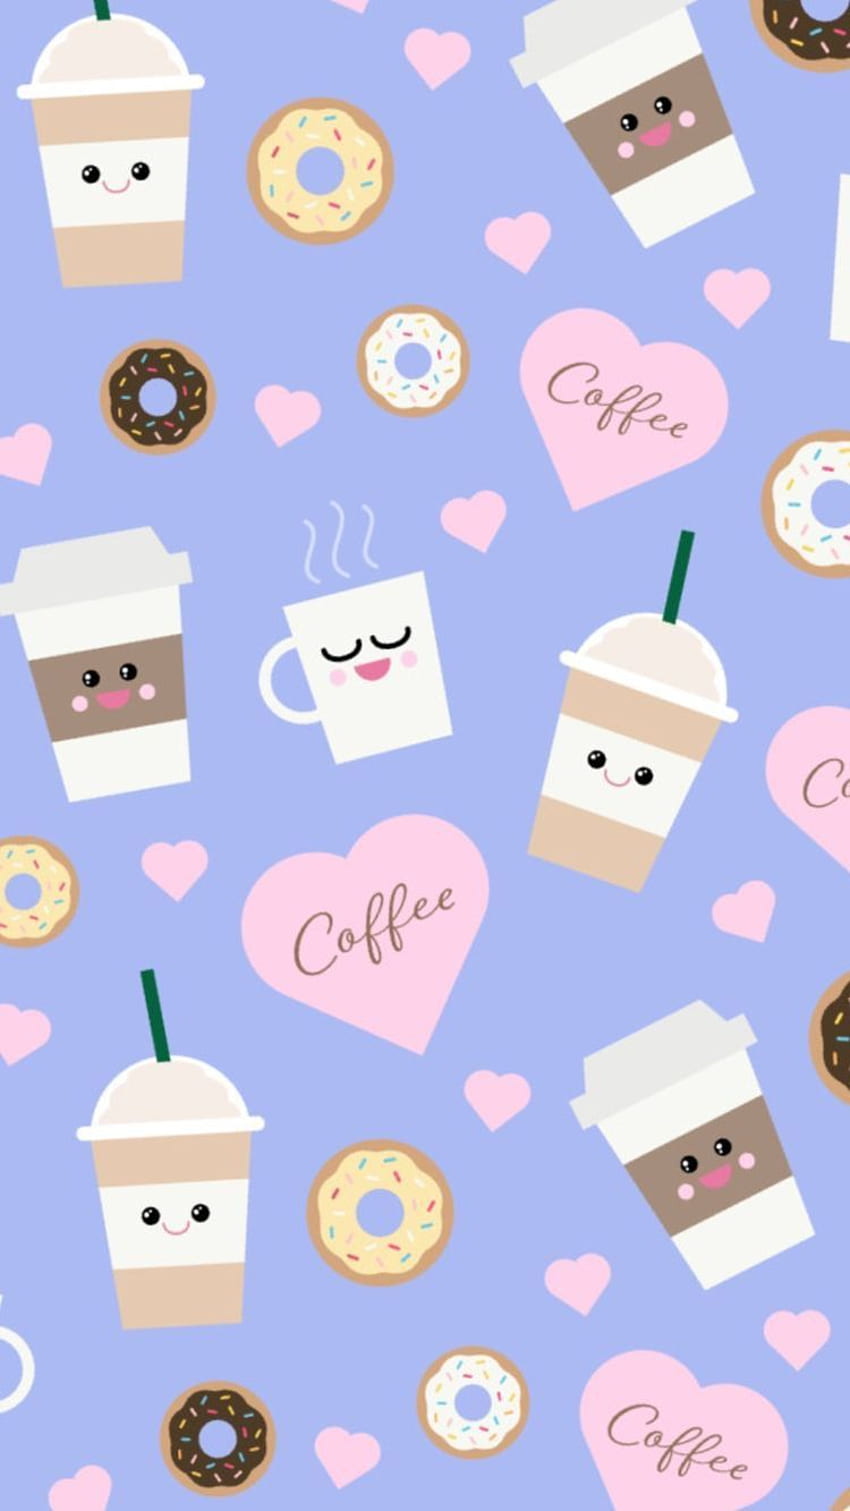 42692 Cute Coffee Pattern Images Stock Photos  Vectors  Shutterstock